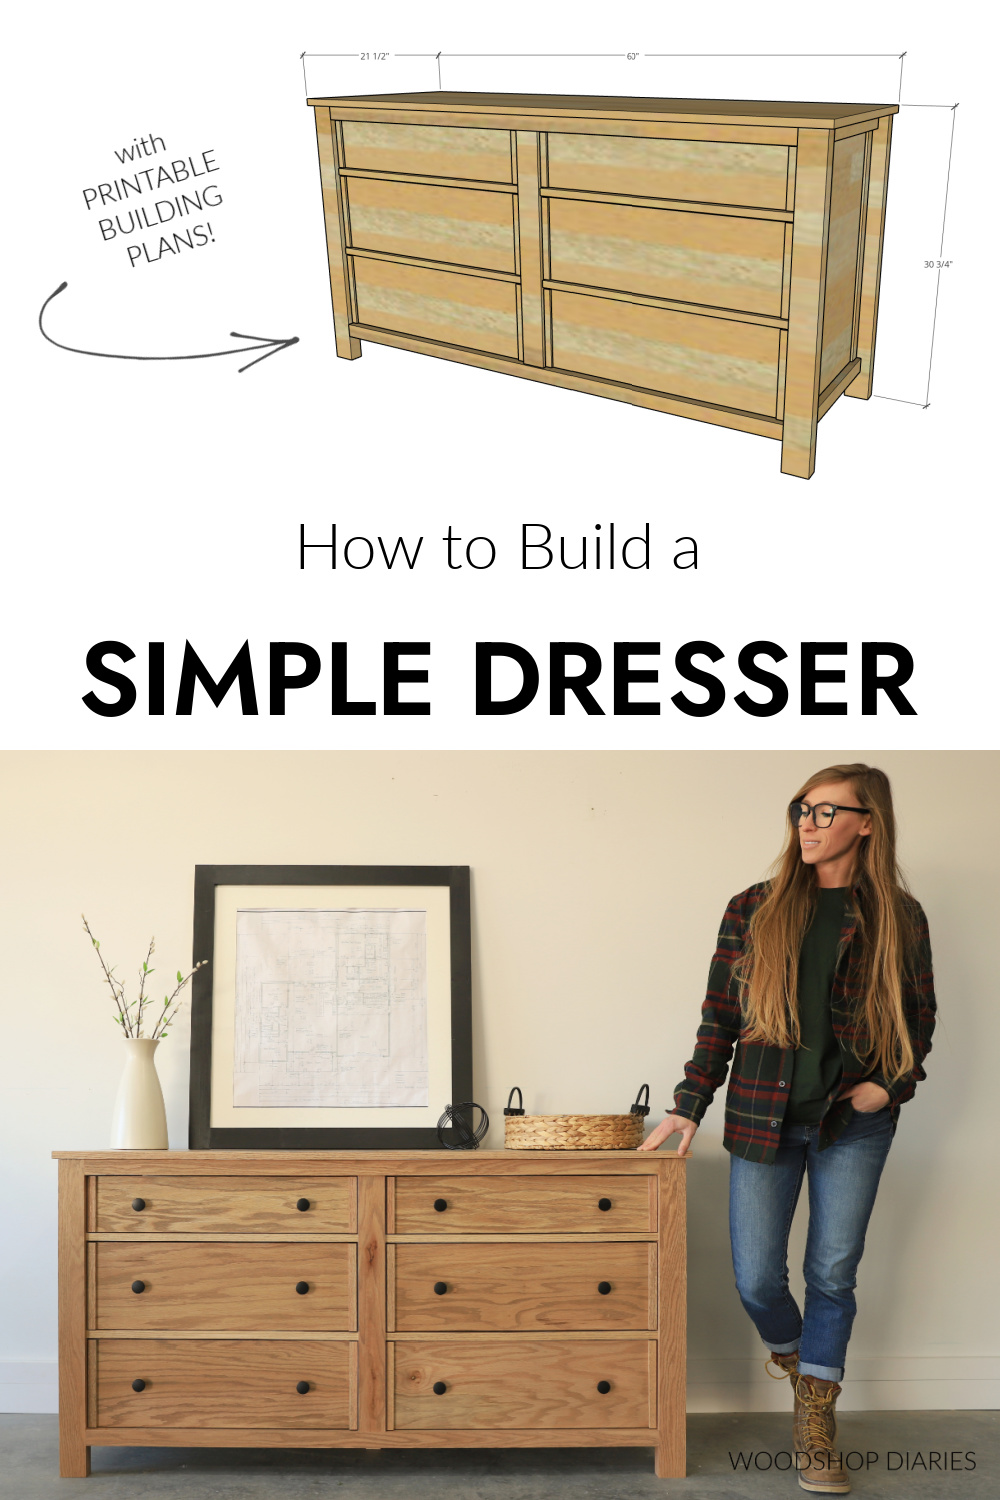 Pinterest collage image showing overall dimensional diagram at top and Shara Woodshop Diaries at bottom with completed dresser build with text "how to build a simple dresser with printable building plans"